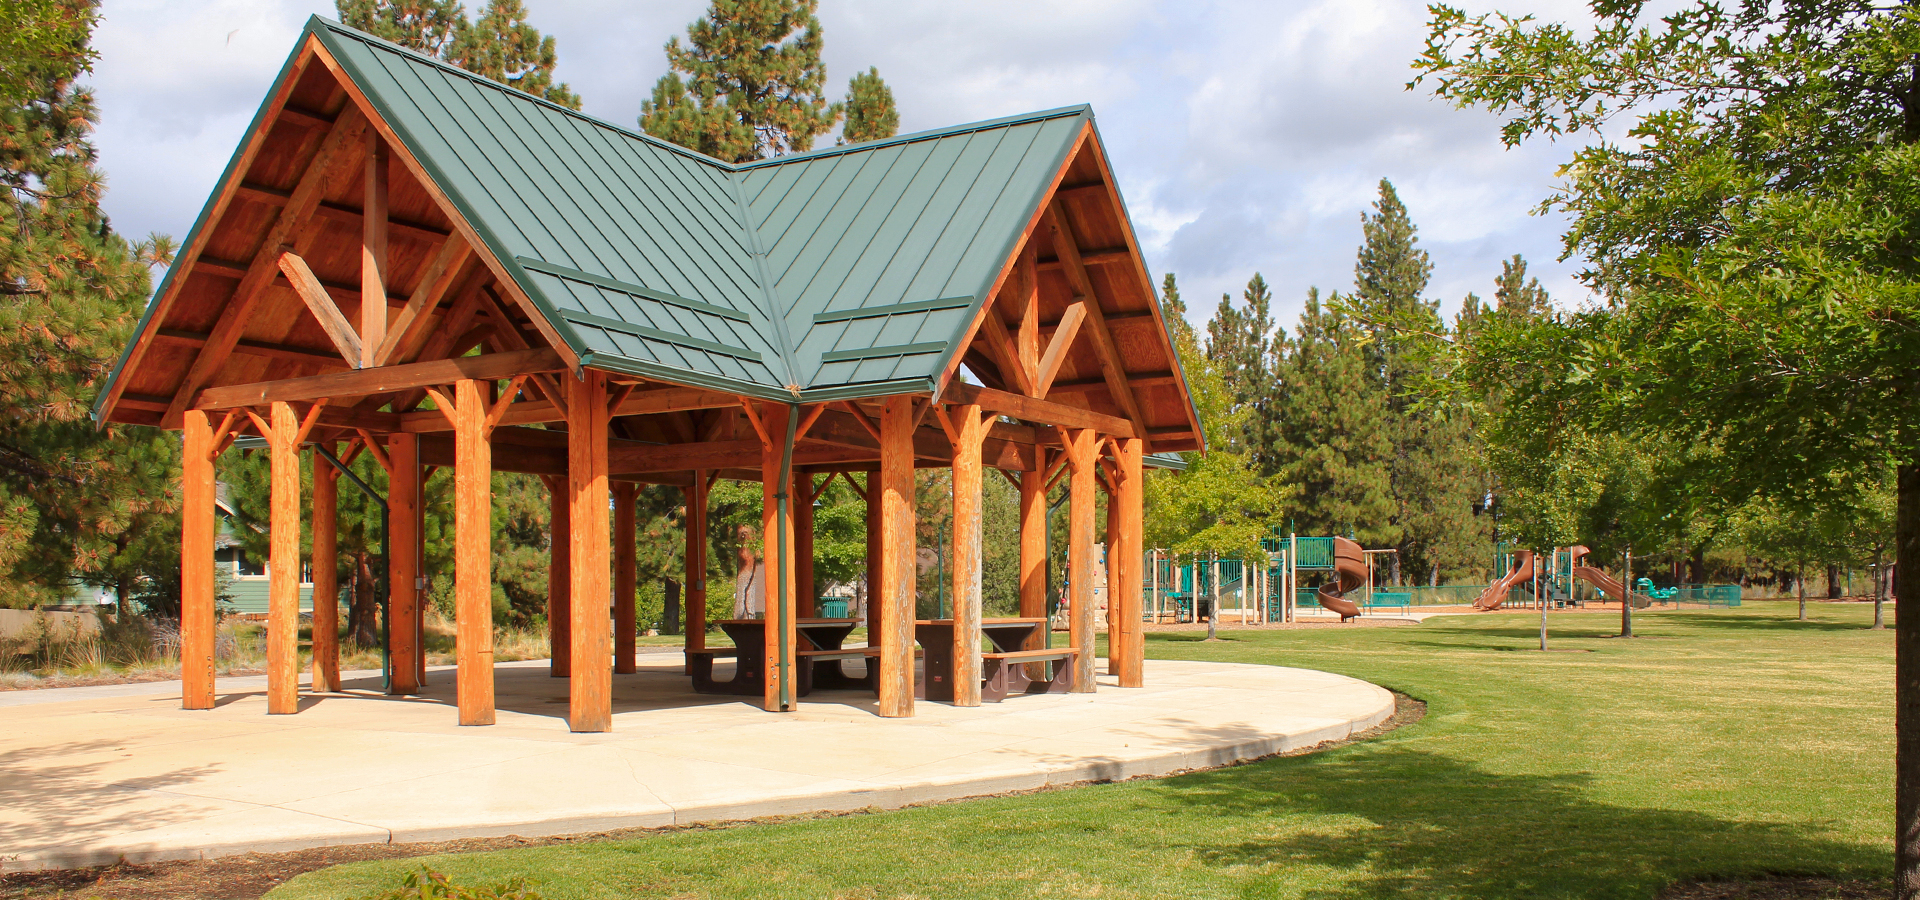 The picnic shelter at Wildflower Park.